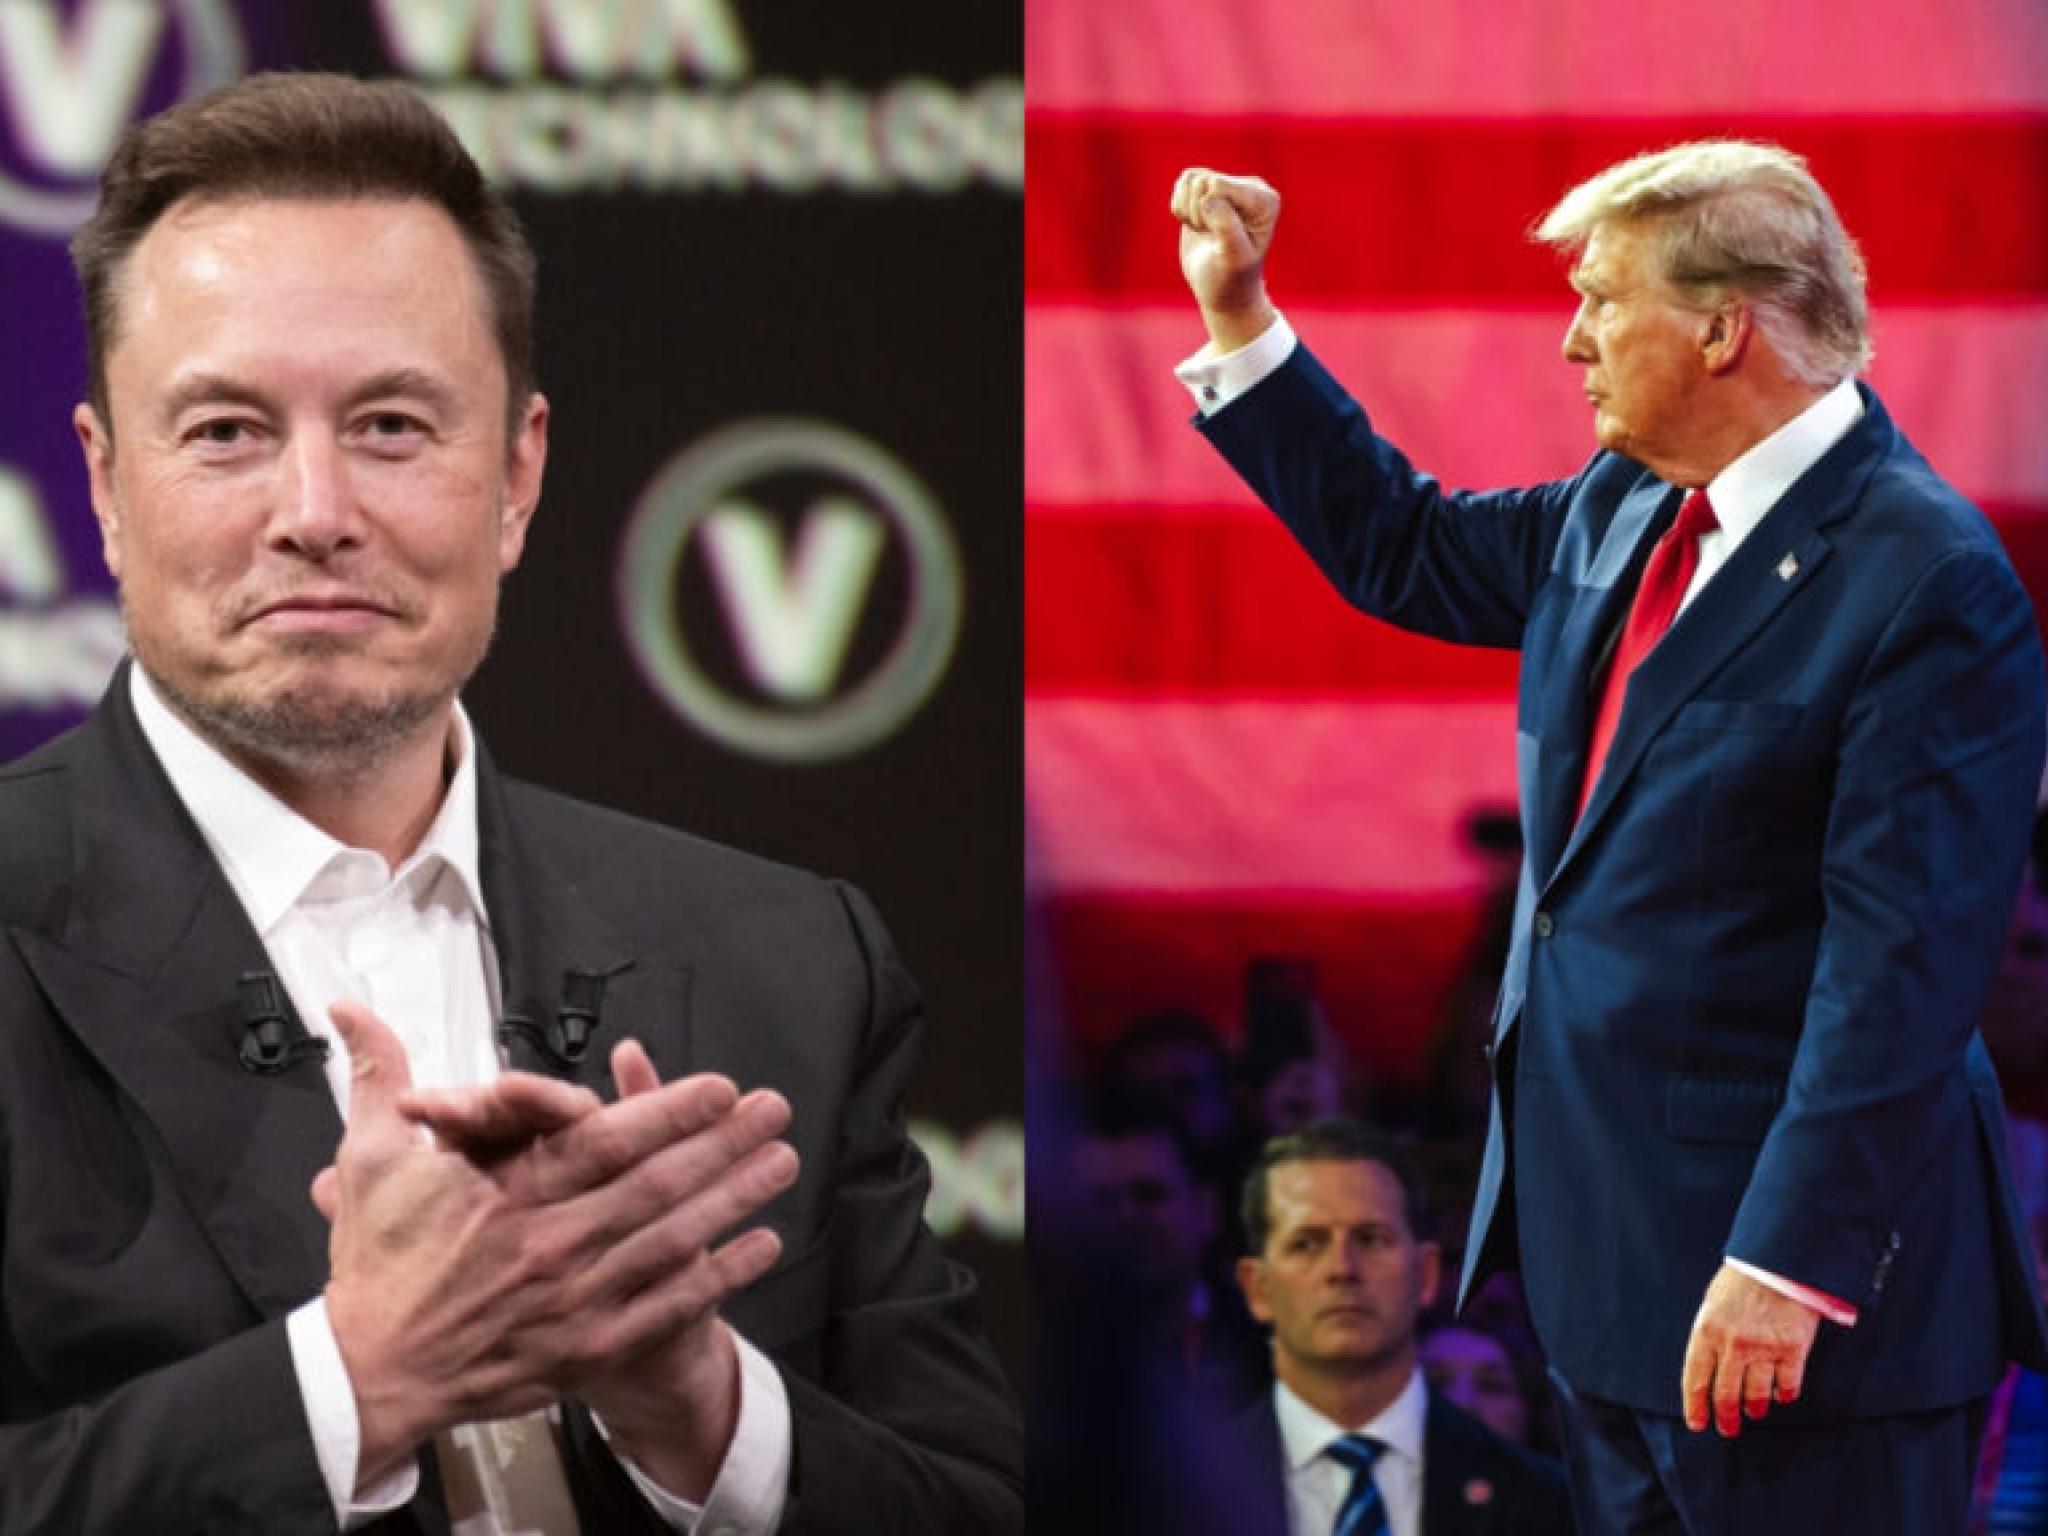  will-elon-musks-endorsement-of-trump-impact-tesla-this-veteran-analyst-thinks-so-heres-why 